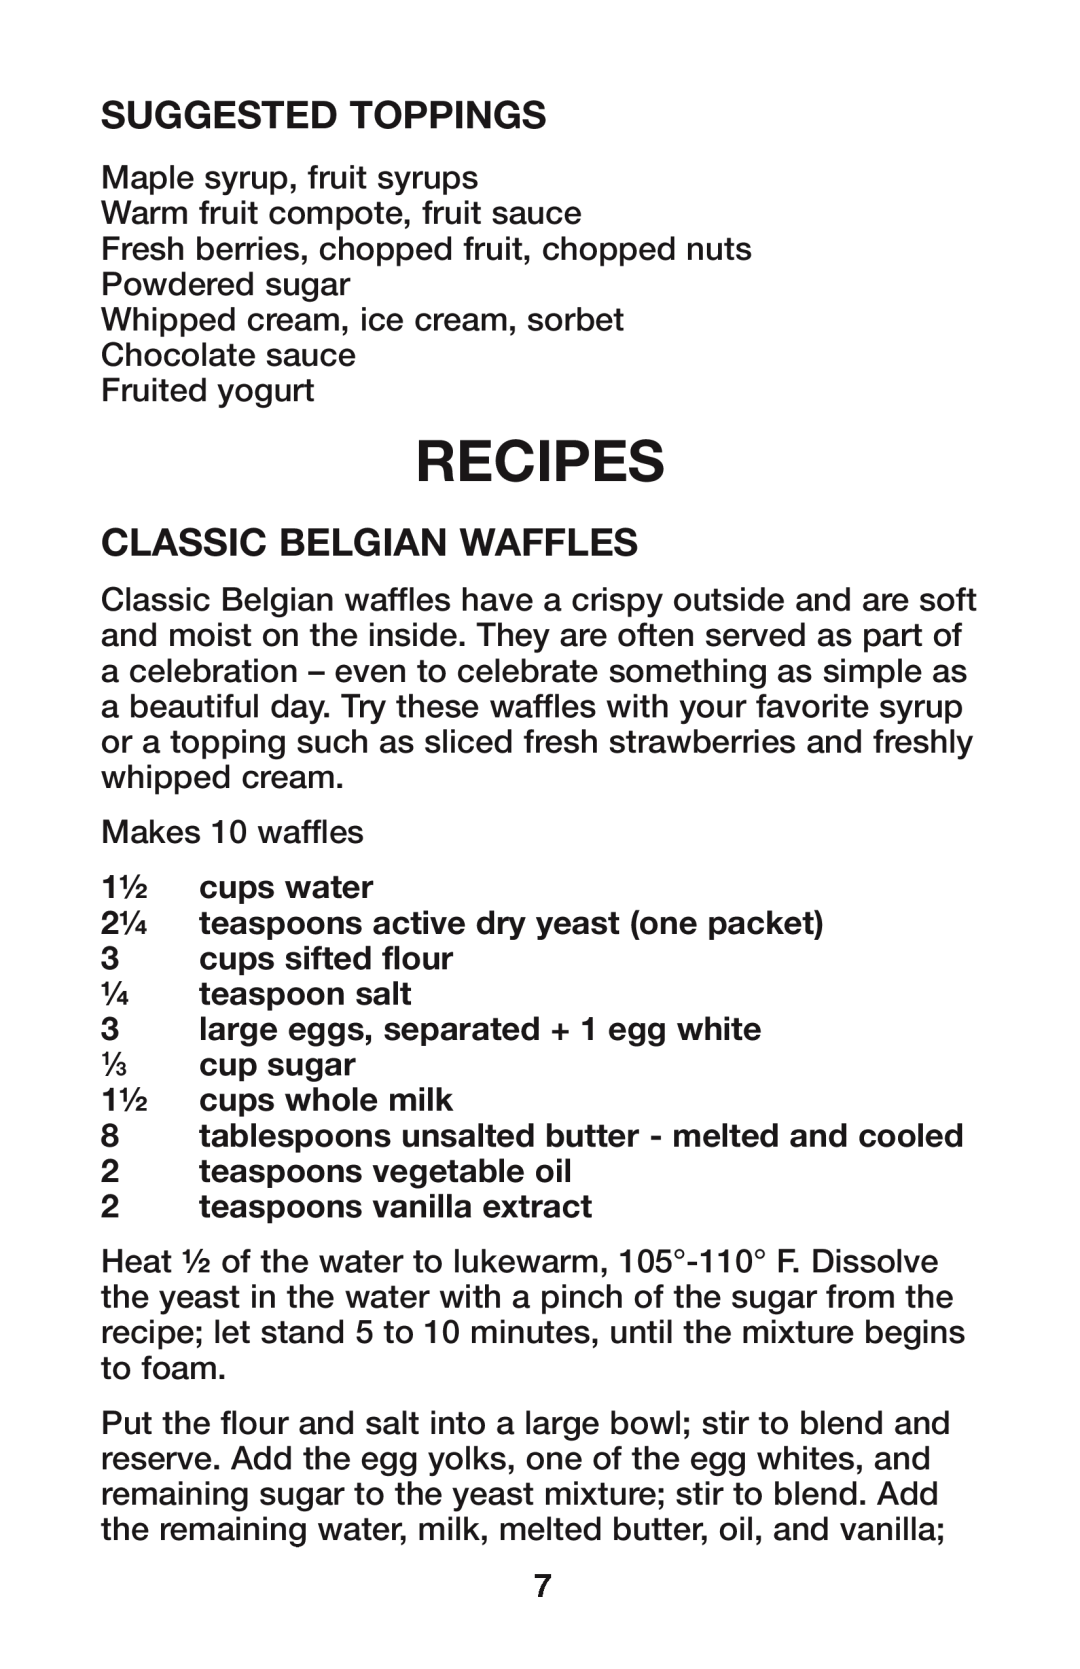 Waring IB08WR119 Recipes, Suggested Toppings, Classic Belgian Waffles, 1½ cups water, 3cups sifted flour ¼teaspoon salt 